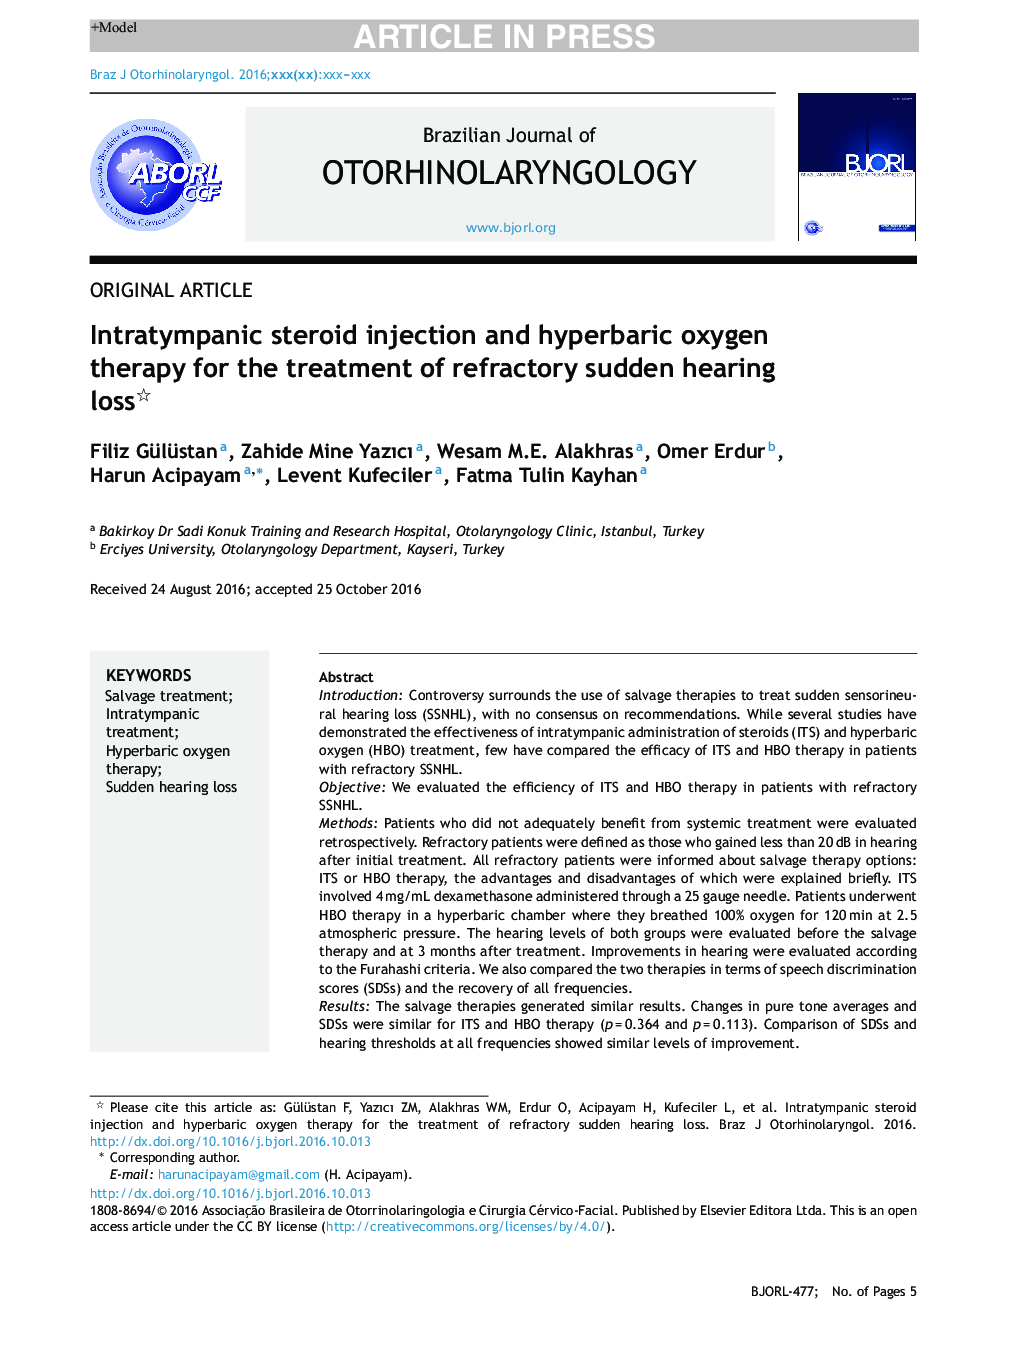 Intratympanic steroid injection and hyperbaric oxygen therapy for the treatment of refractory sudden hearing loss